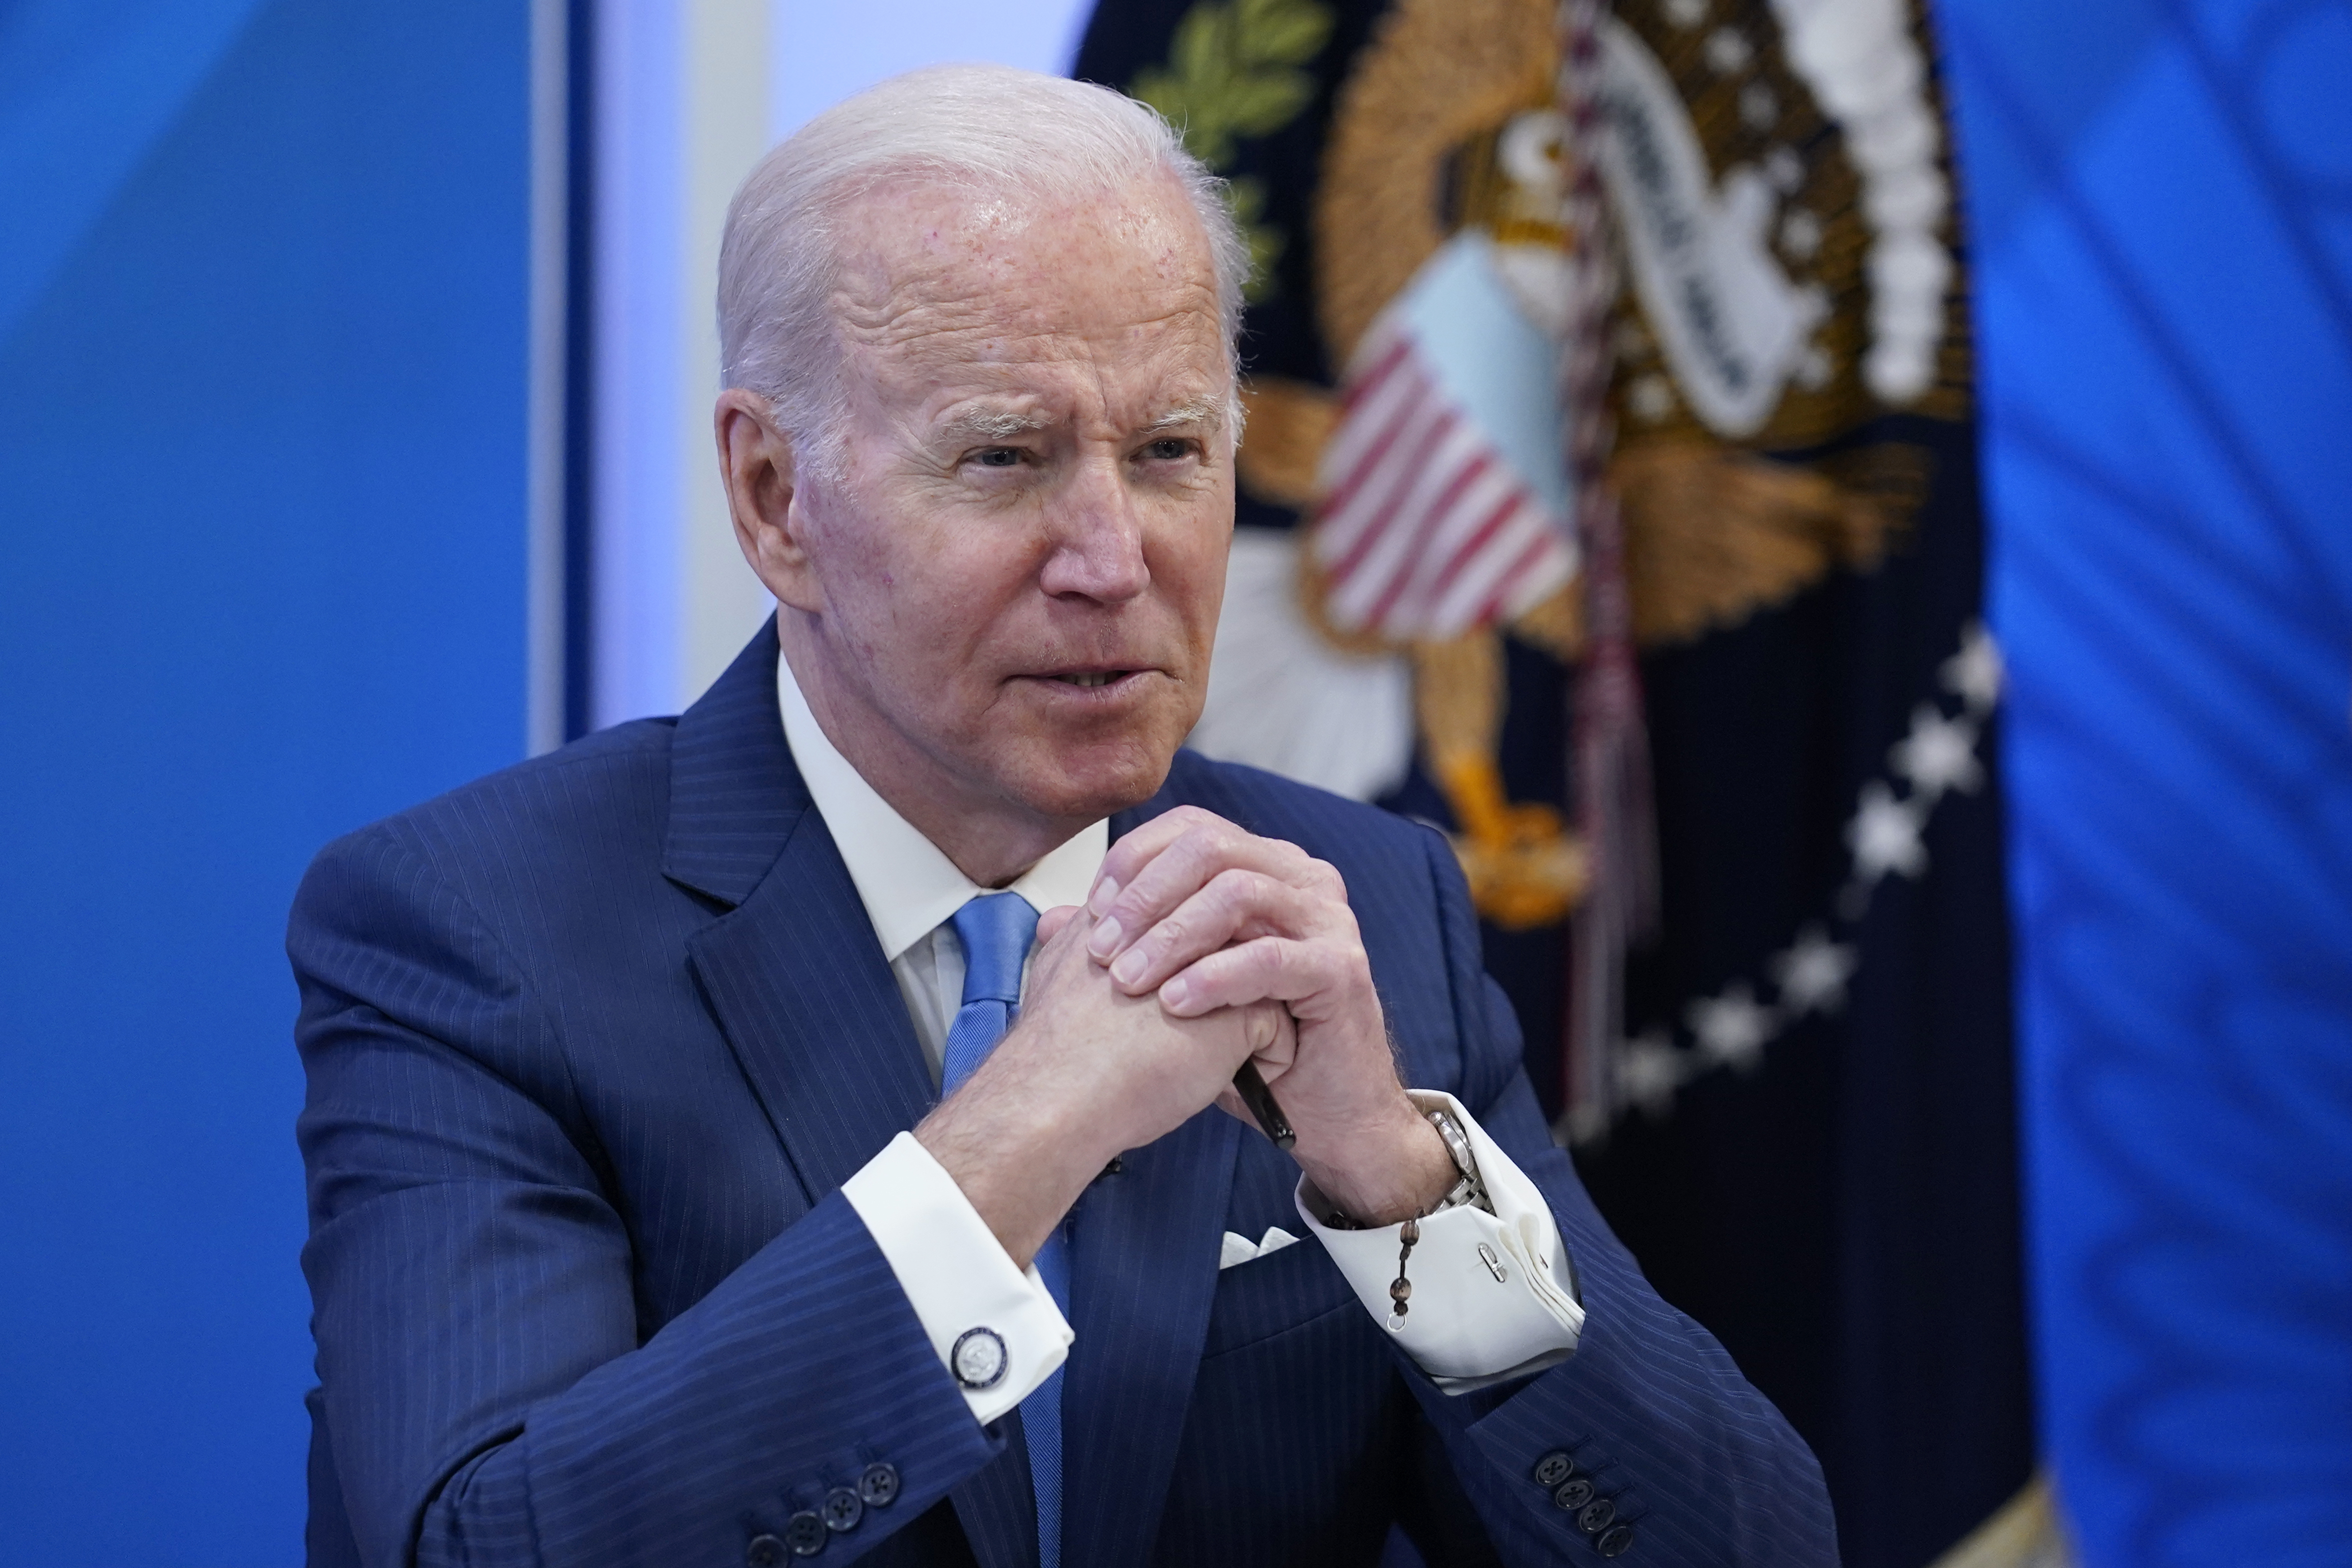 President Joe Biden speaks as he meets with small business owners in the South Court Auditorium on the White House complex in Washington, Thursday, April 28, 2022. (AP Photo/Susan Walsh)